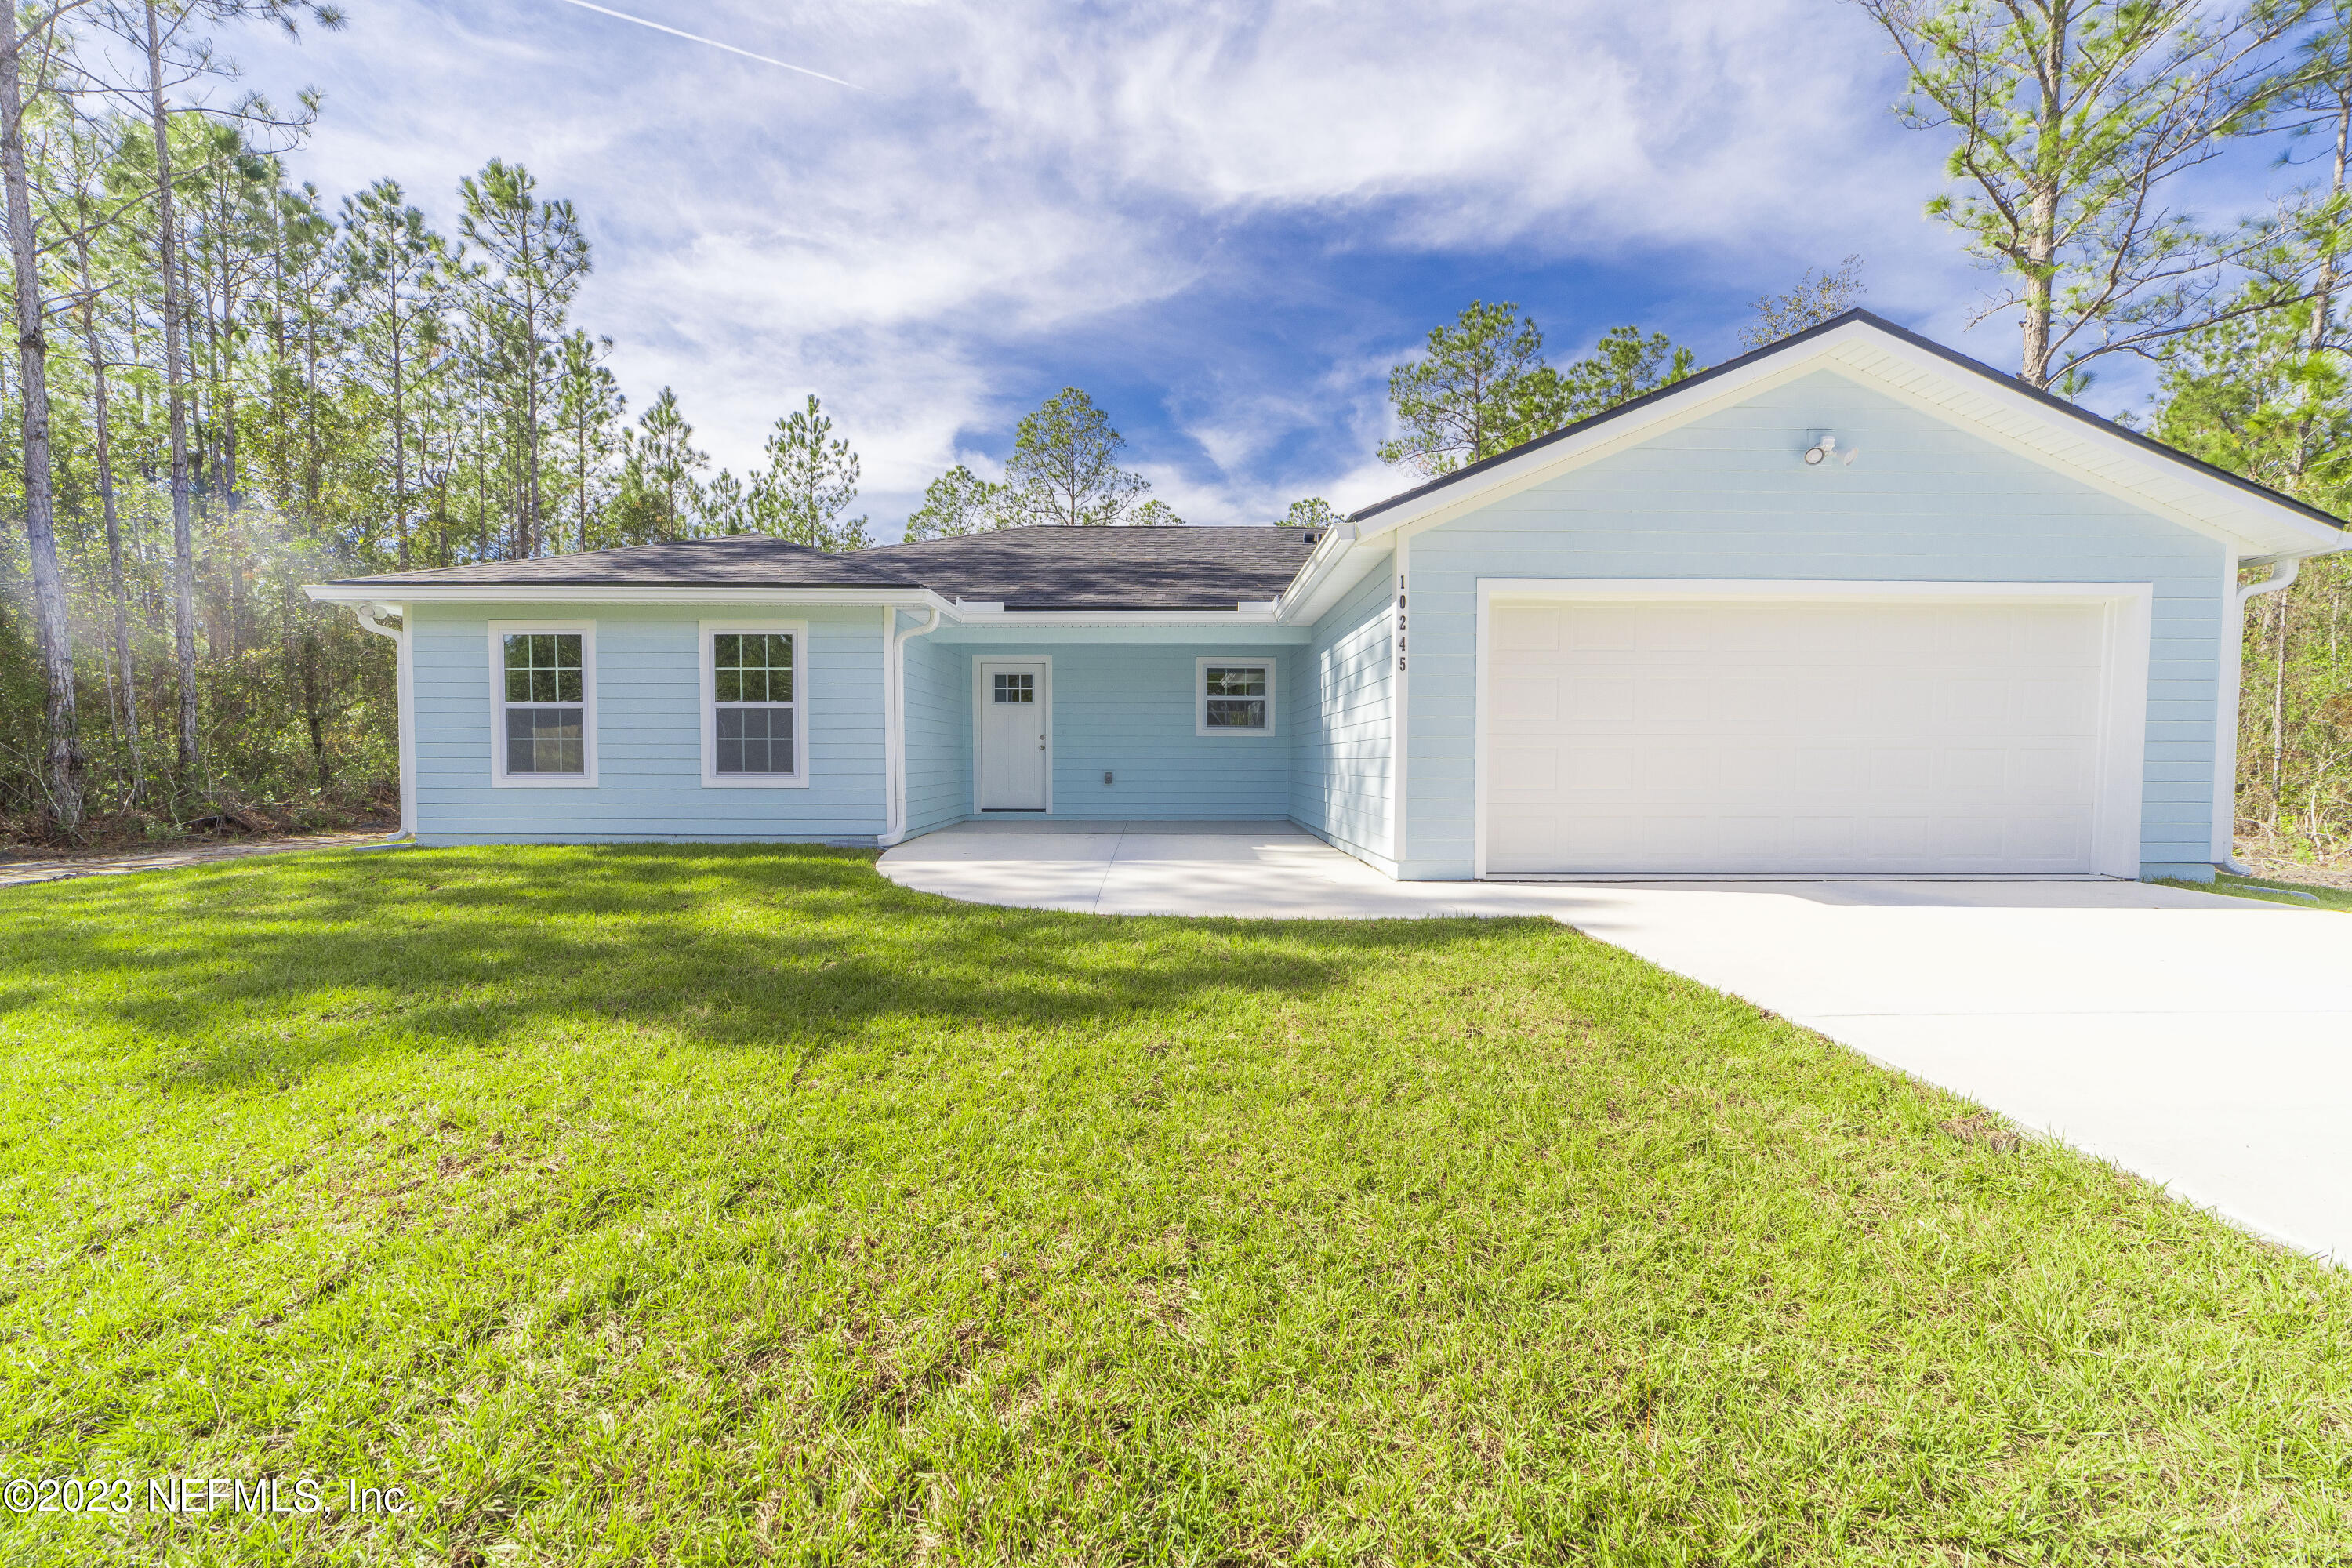 Hastings, FL home for sale located at 10245 CARPENTER Avenue, Hastings, FL 32145